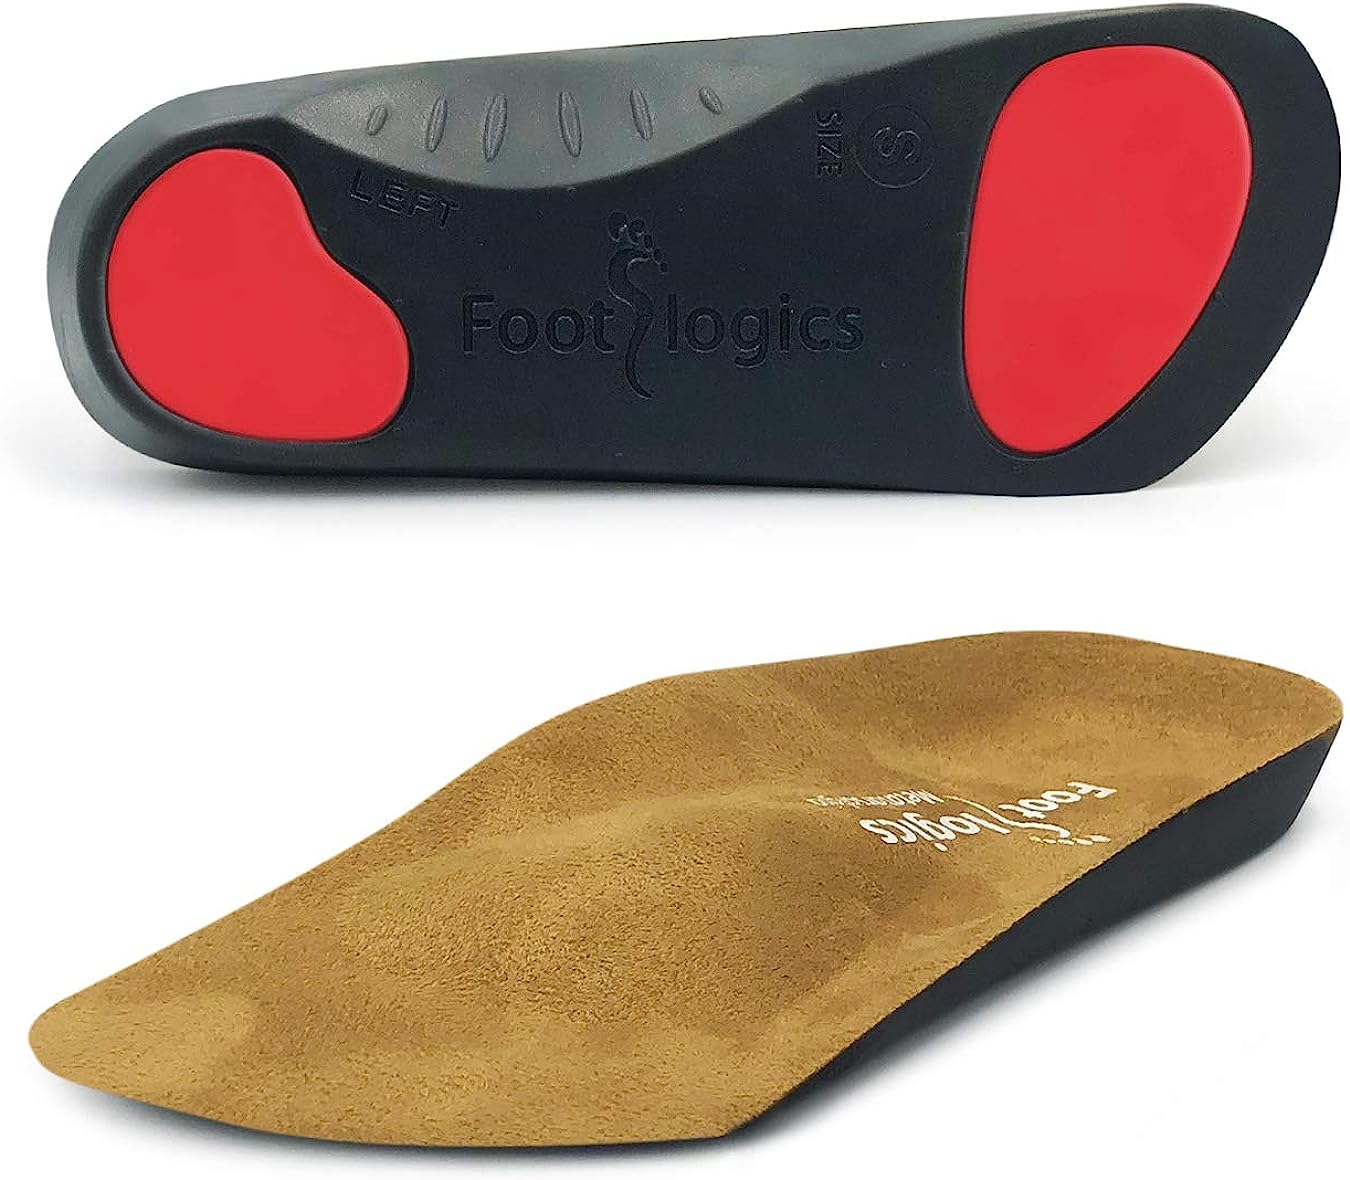 Footlogics 3/4 Length Orthotic Shoe Insoles with [...]